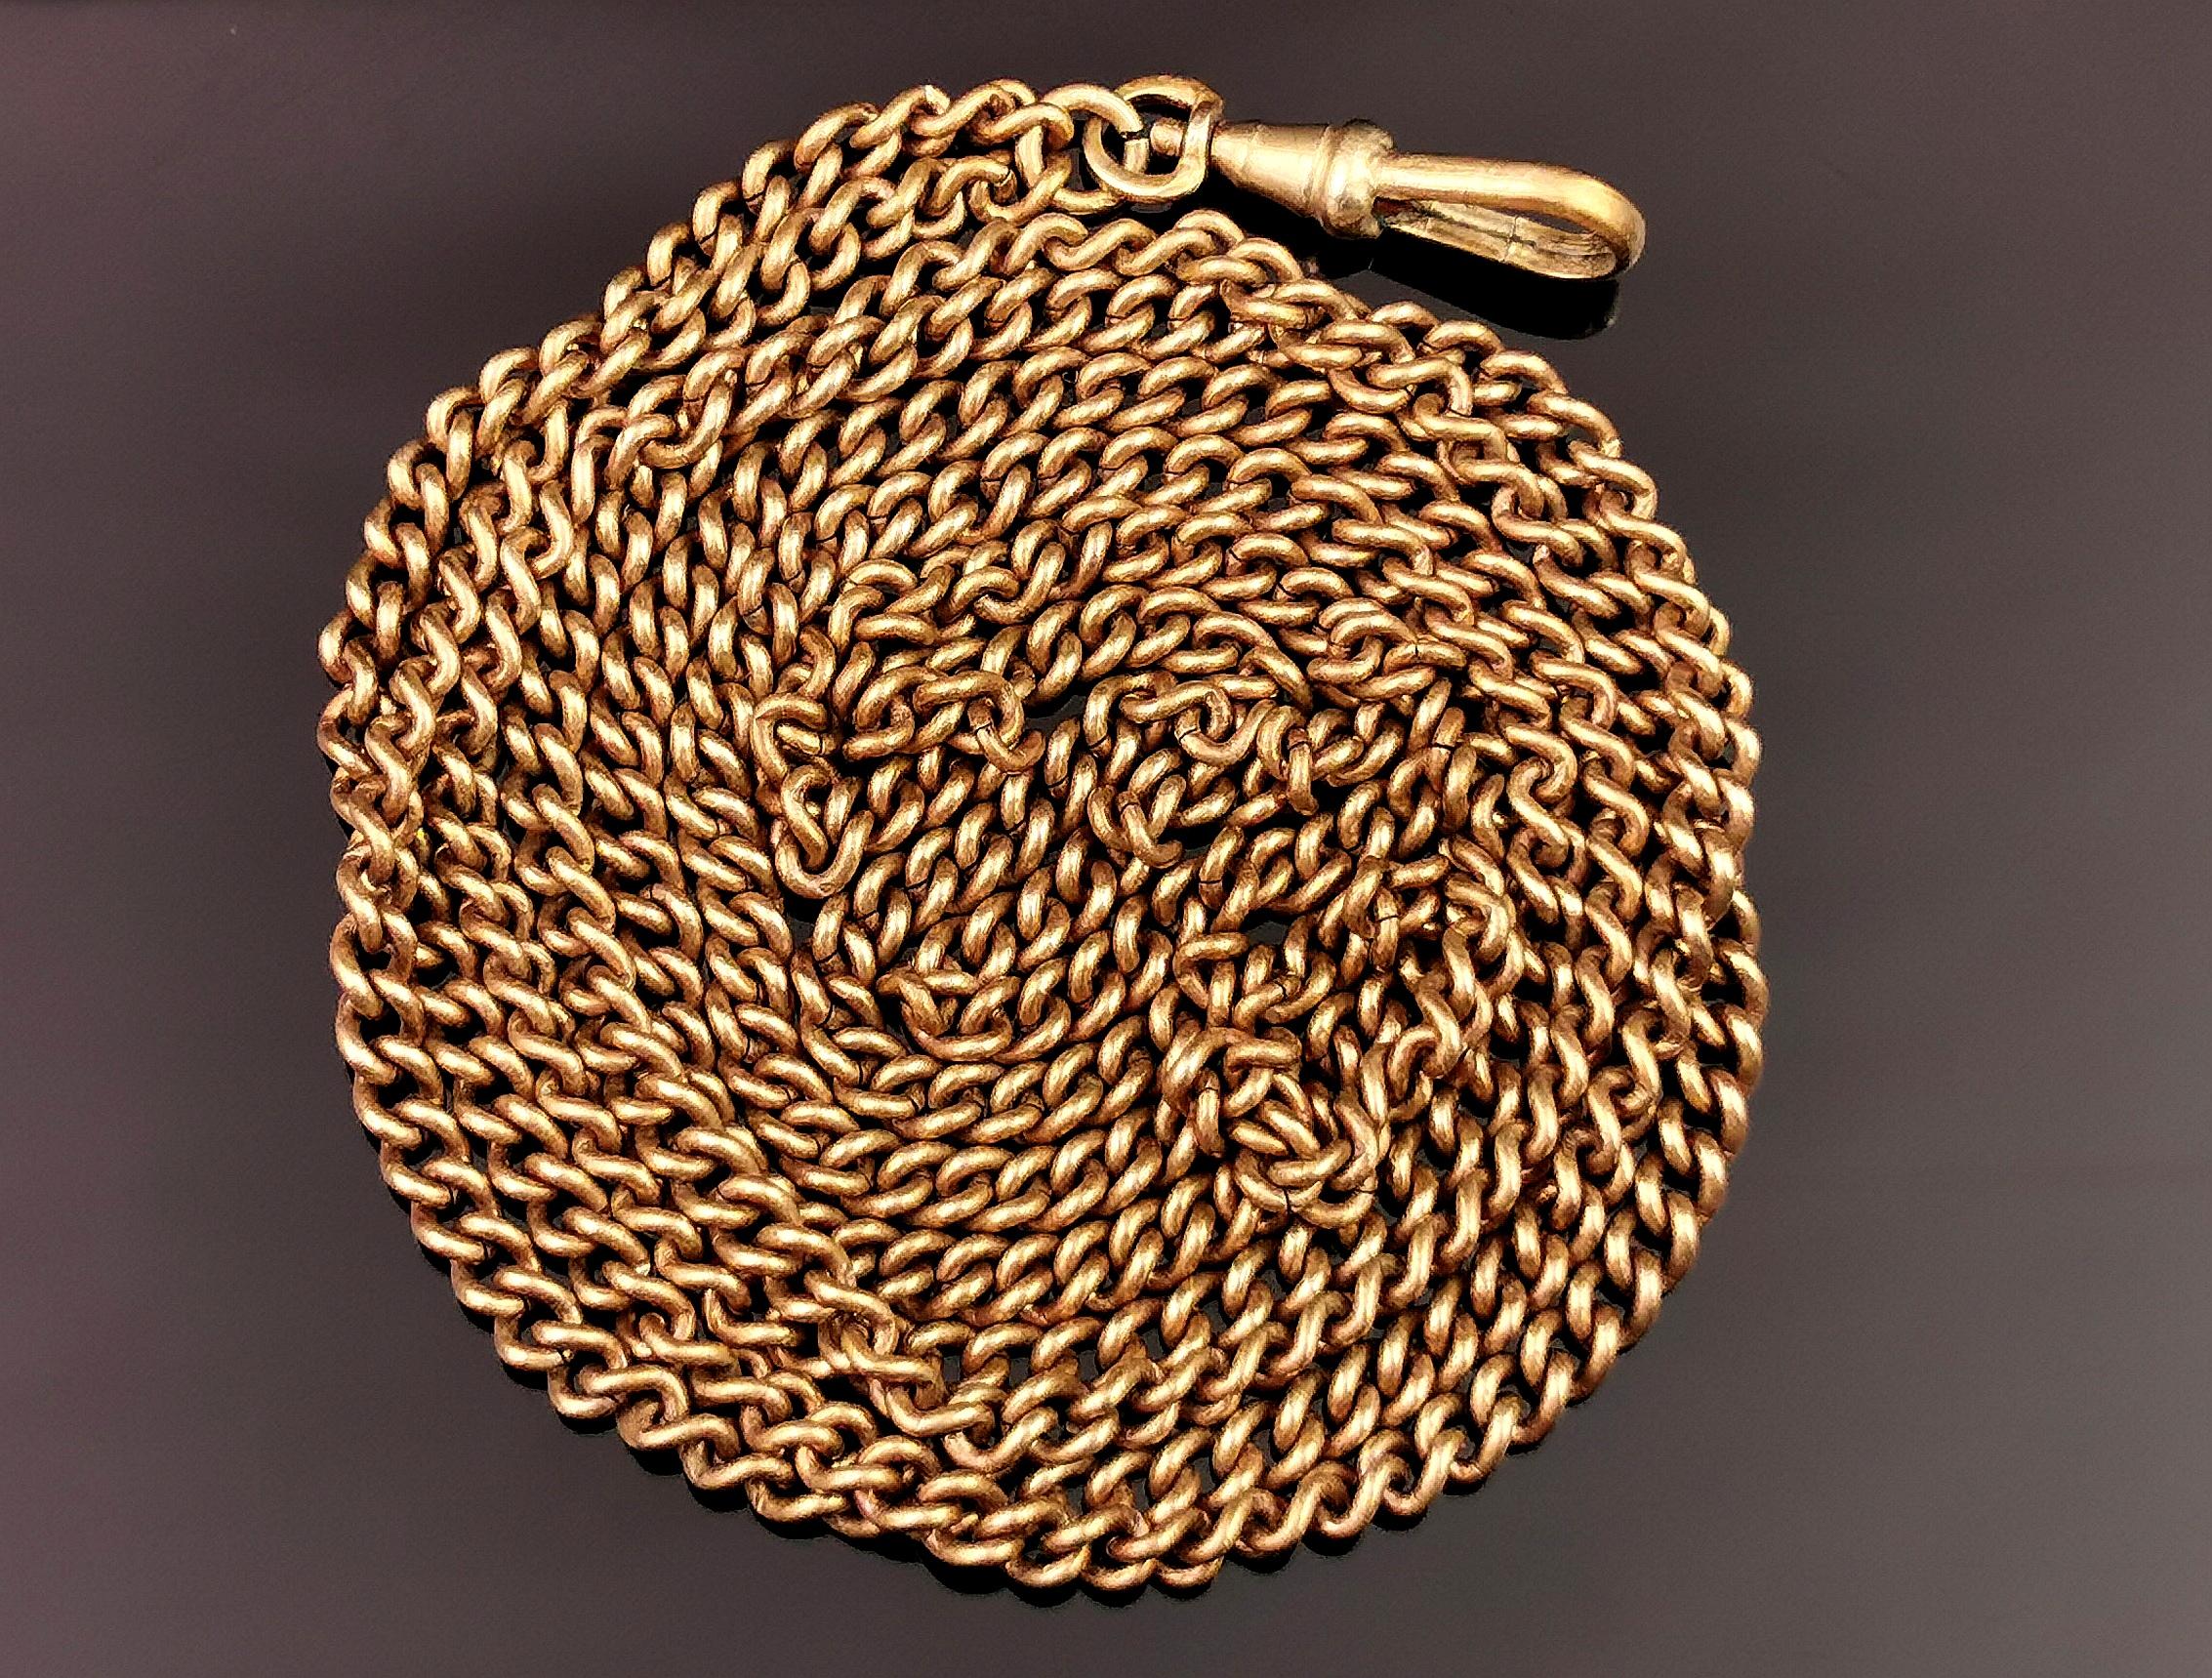 A gorgeous antique, Victorian era longuard chain necklace.

This is quite a chunky curb link long chain, gold plated brass though most of the plating is worn and lots of warm bronze brass colours showing through.

It has a dog clip fastener to one